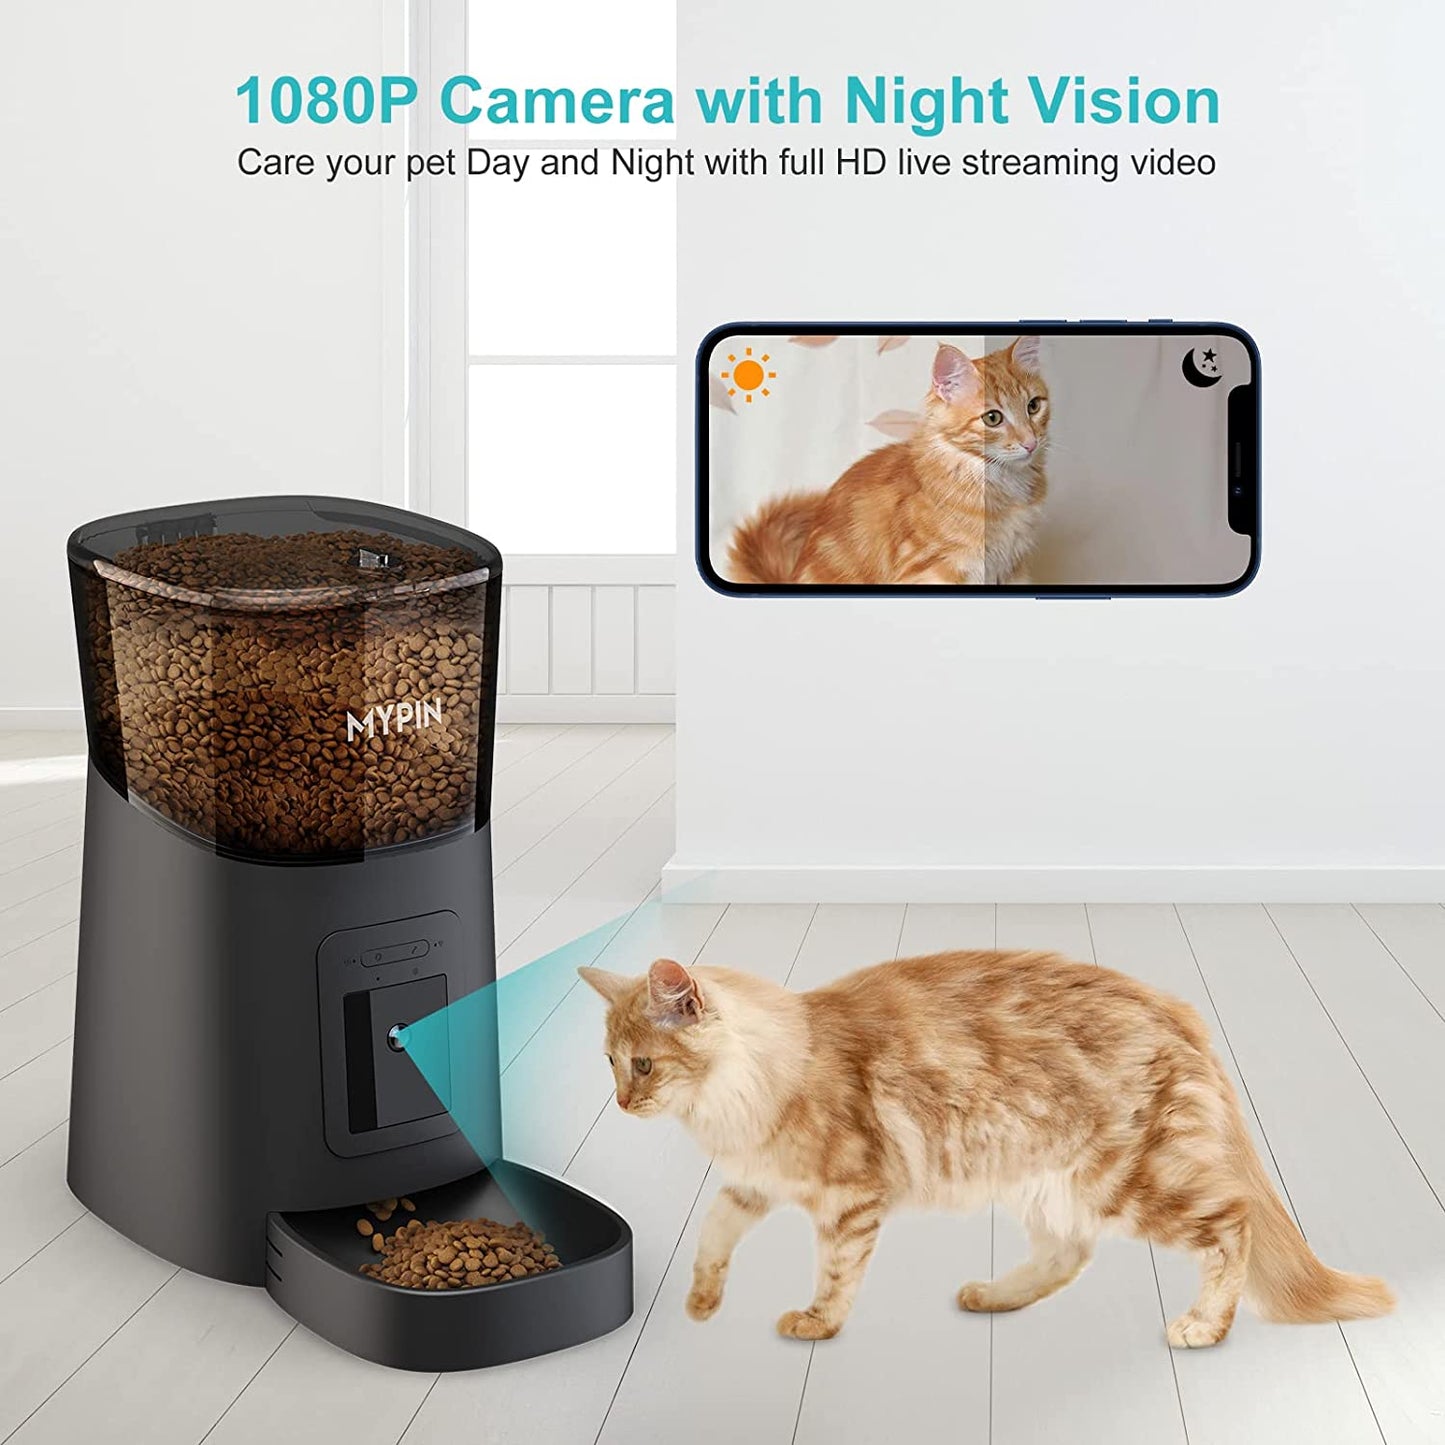 Video Automatic Pet Feeder with HD Camera, Food Dispenser for Cats and Dogs Wifi Smart Feeder with Camera 6L 2-Way Audio,Mobile Phone Control, Timed Feeder,Desiccant Bag up to 8 Meals per Day